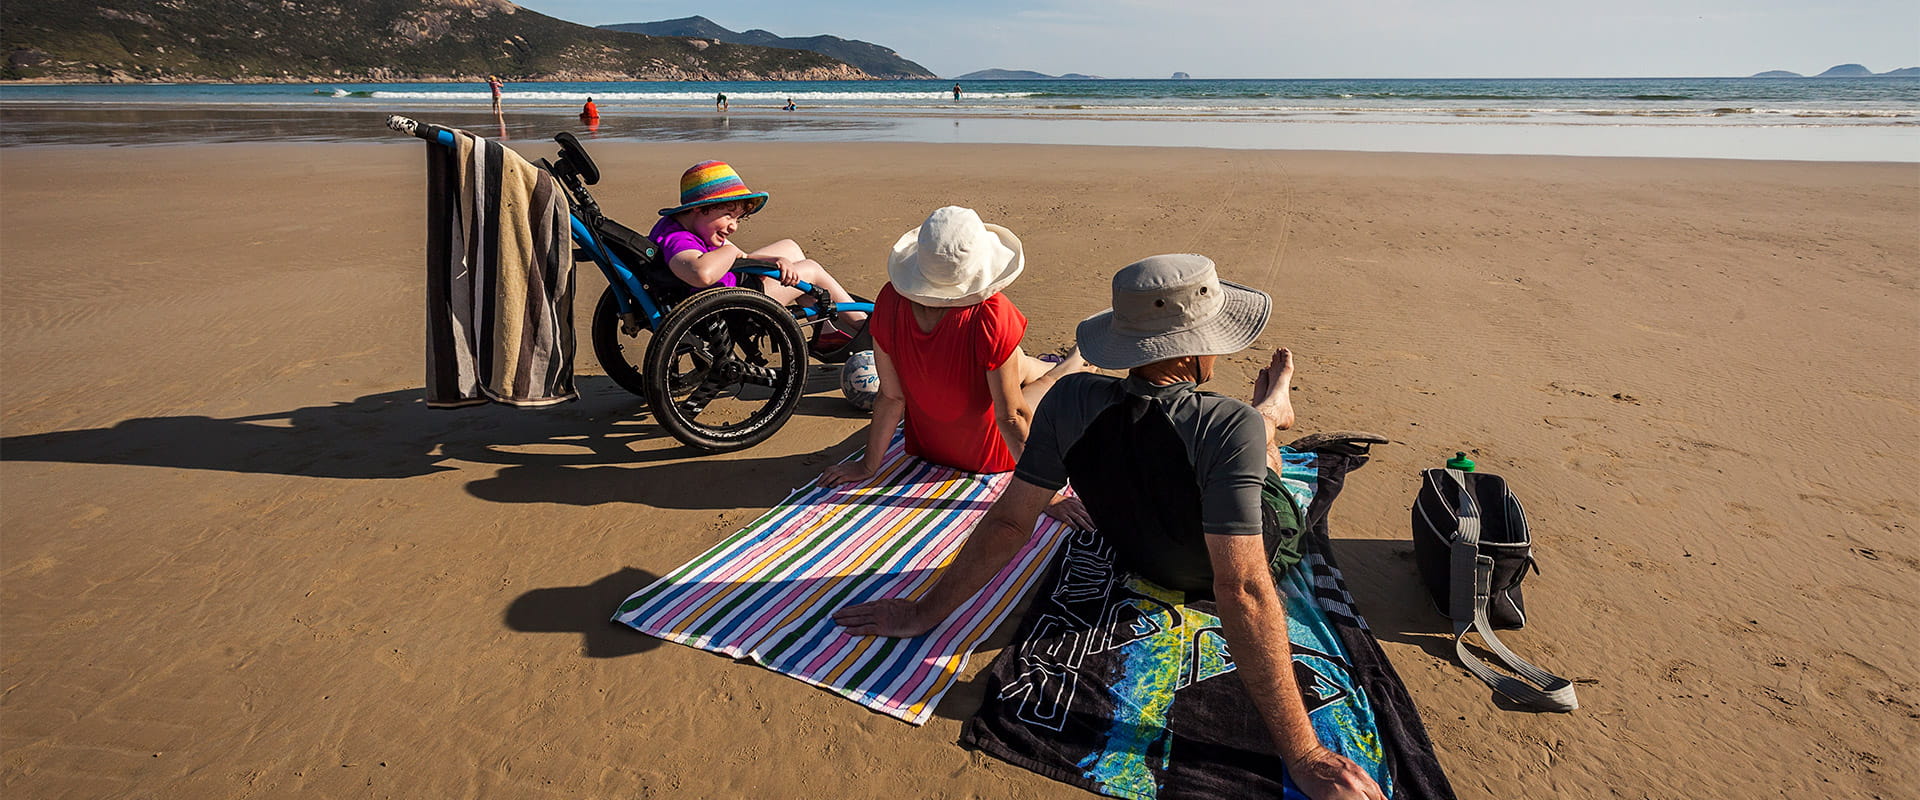 A child wearing a rainbow hat sits in a beach wheelchair while smiling at two adults sitting on beach towels on the sand.